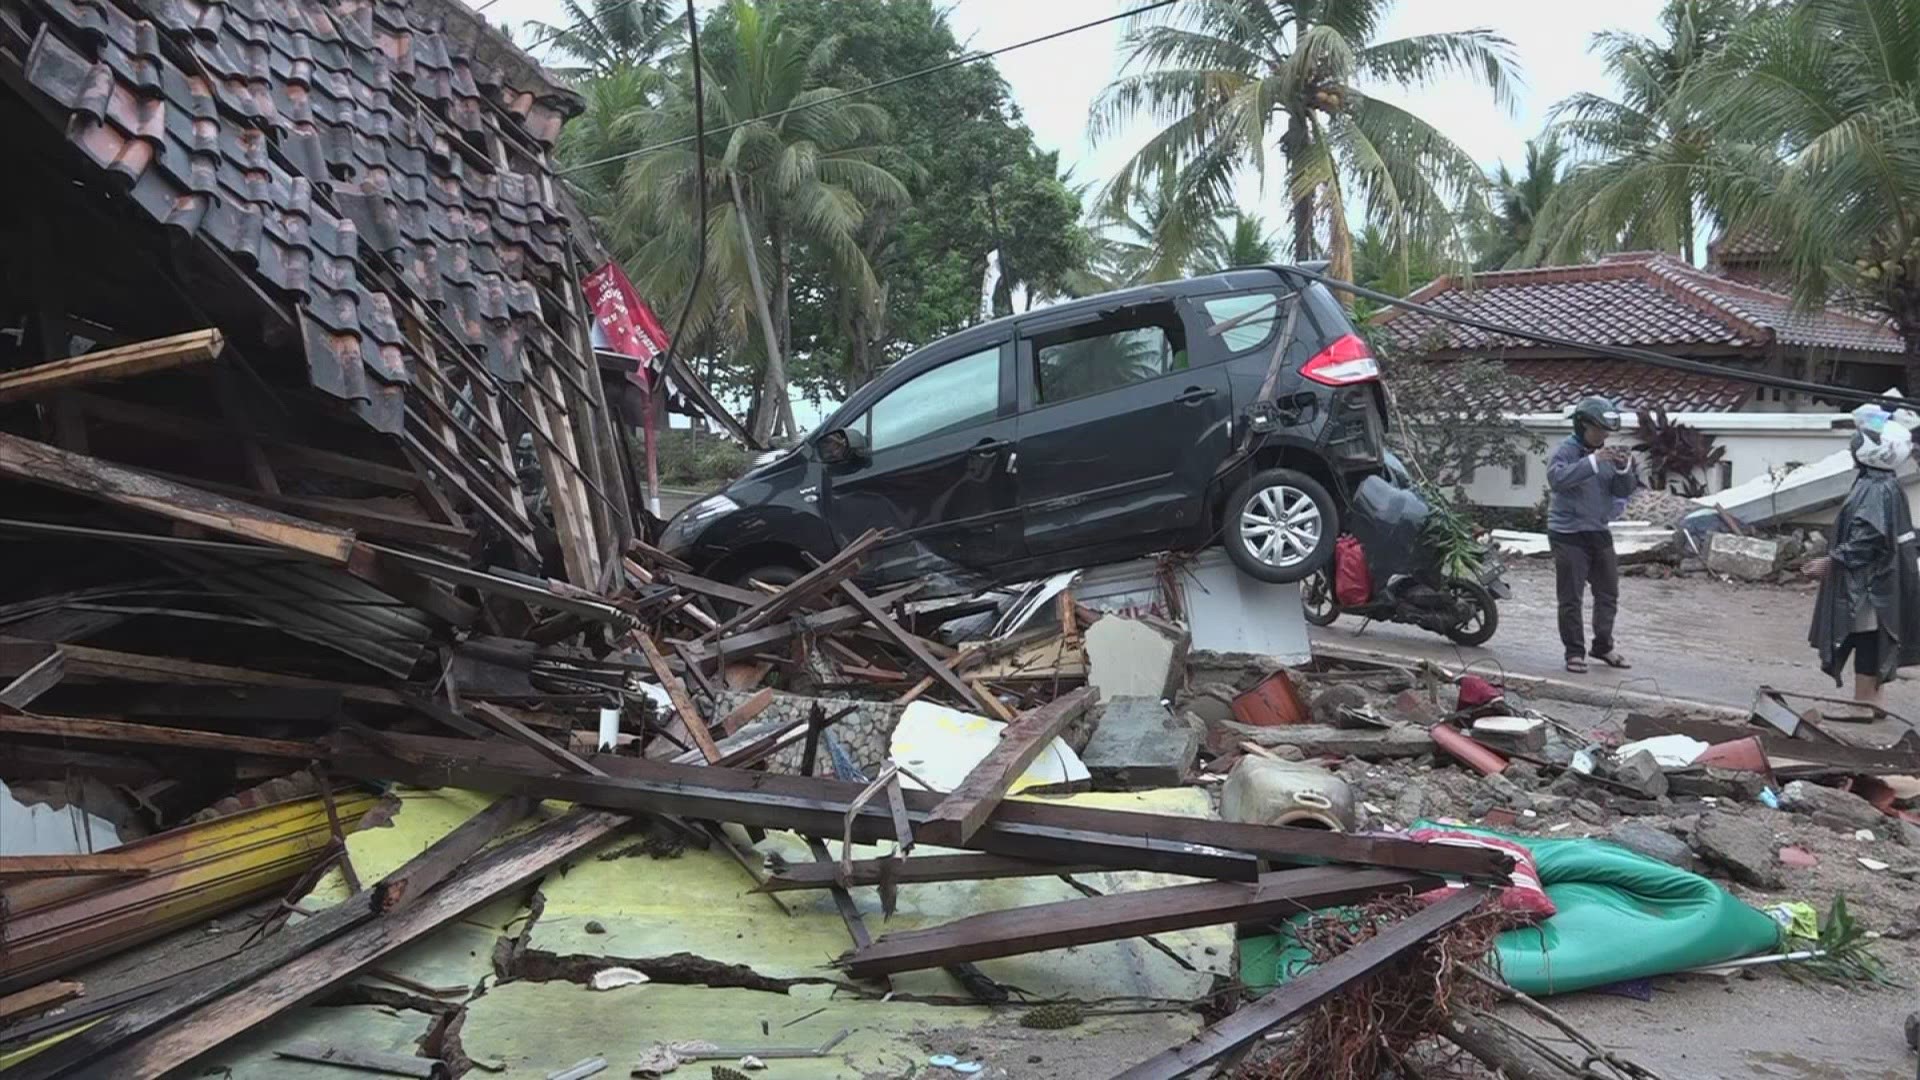 Footage from the Banten province of Indonesia showed widespread tsunami damage to the coastal communities of Carita and Serang, including collapsed houses and cars smashed up on piles of rubble. (AP)